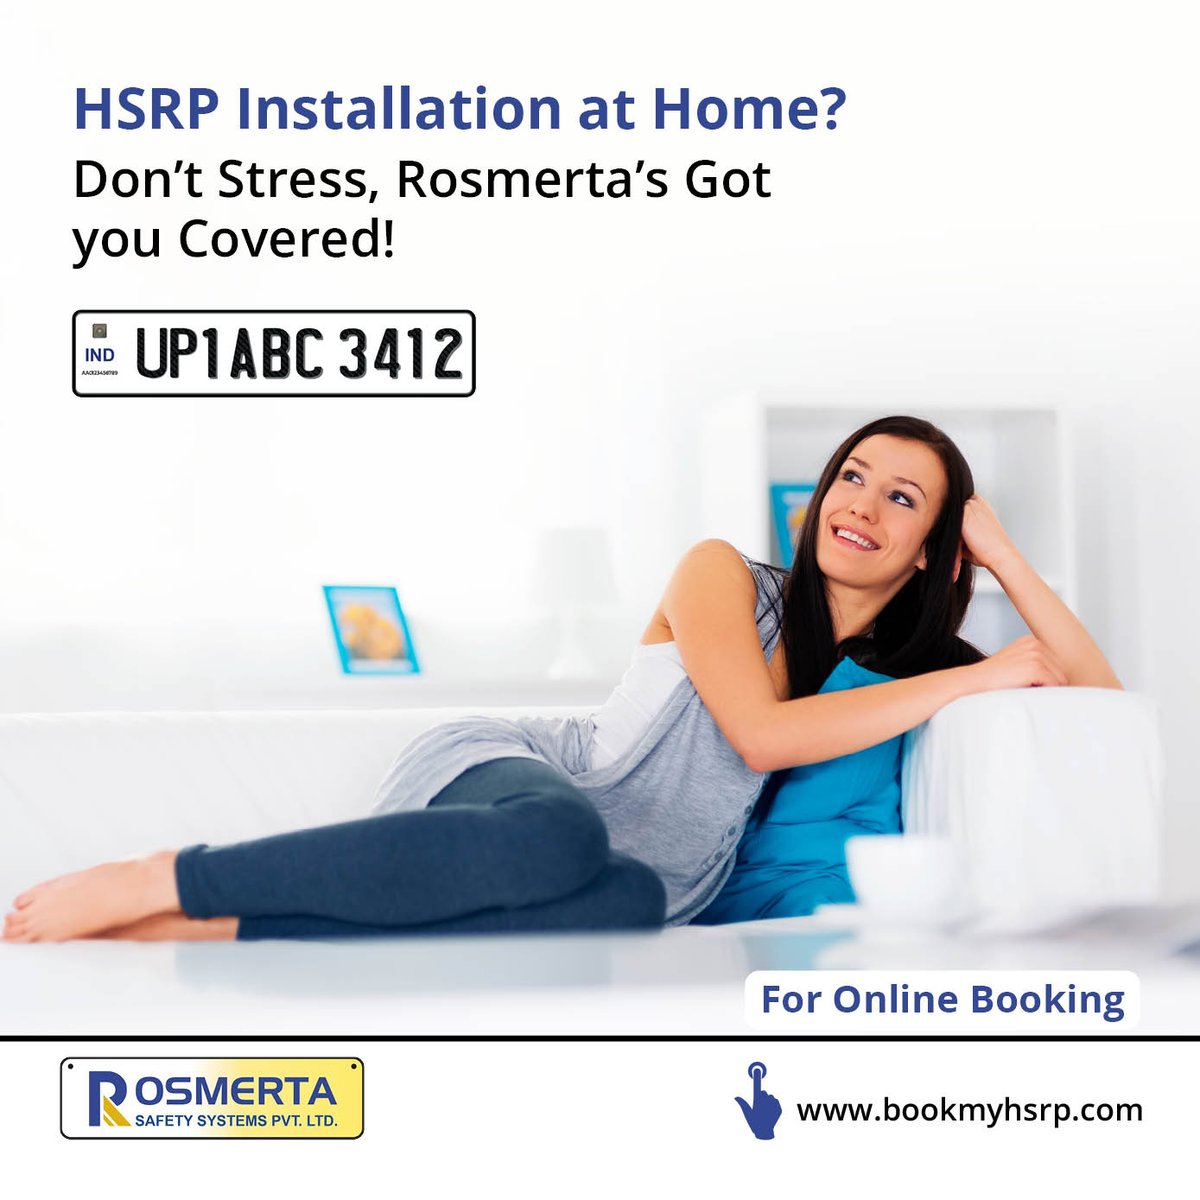 Experience peace of mind with Rosmerta as we bring security to your doorstep. High Security Registration Plate installation made effortless, because your safety is our priority. Don't stress. 

#highsecuritynumberplates #bookonline #bookmyhsrp #IndianGovt